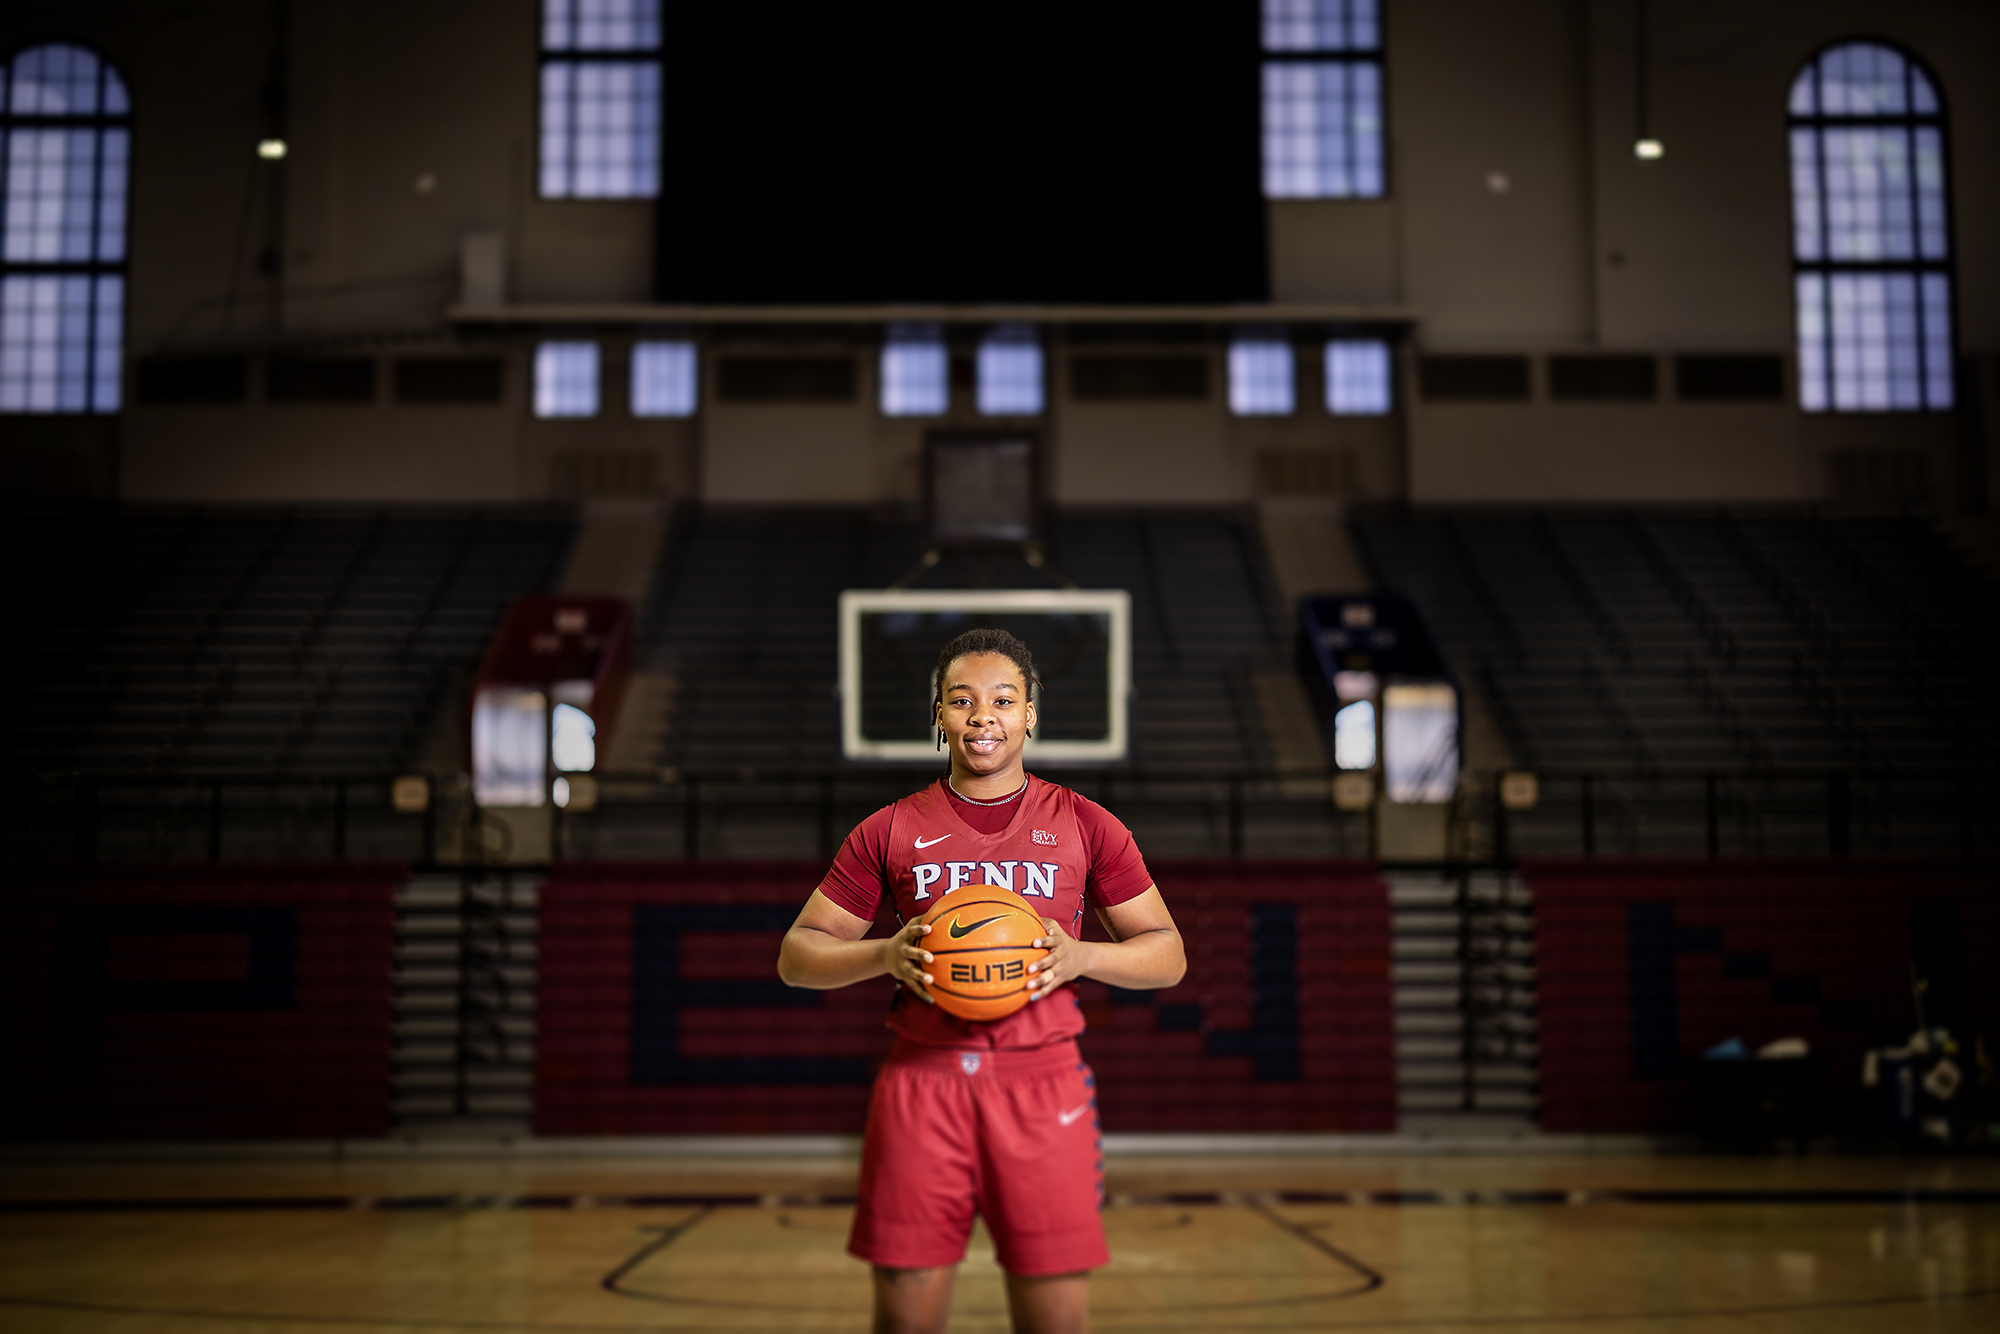 At The Palestra, Jordan Obi poses at mid-court with the ball in her hands.